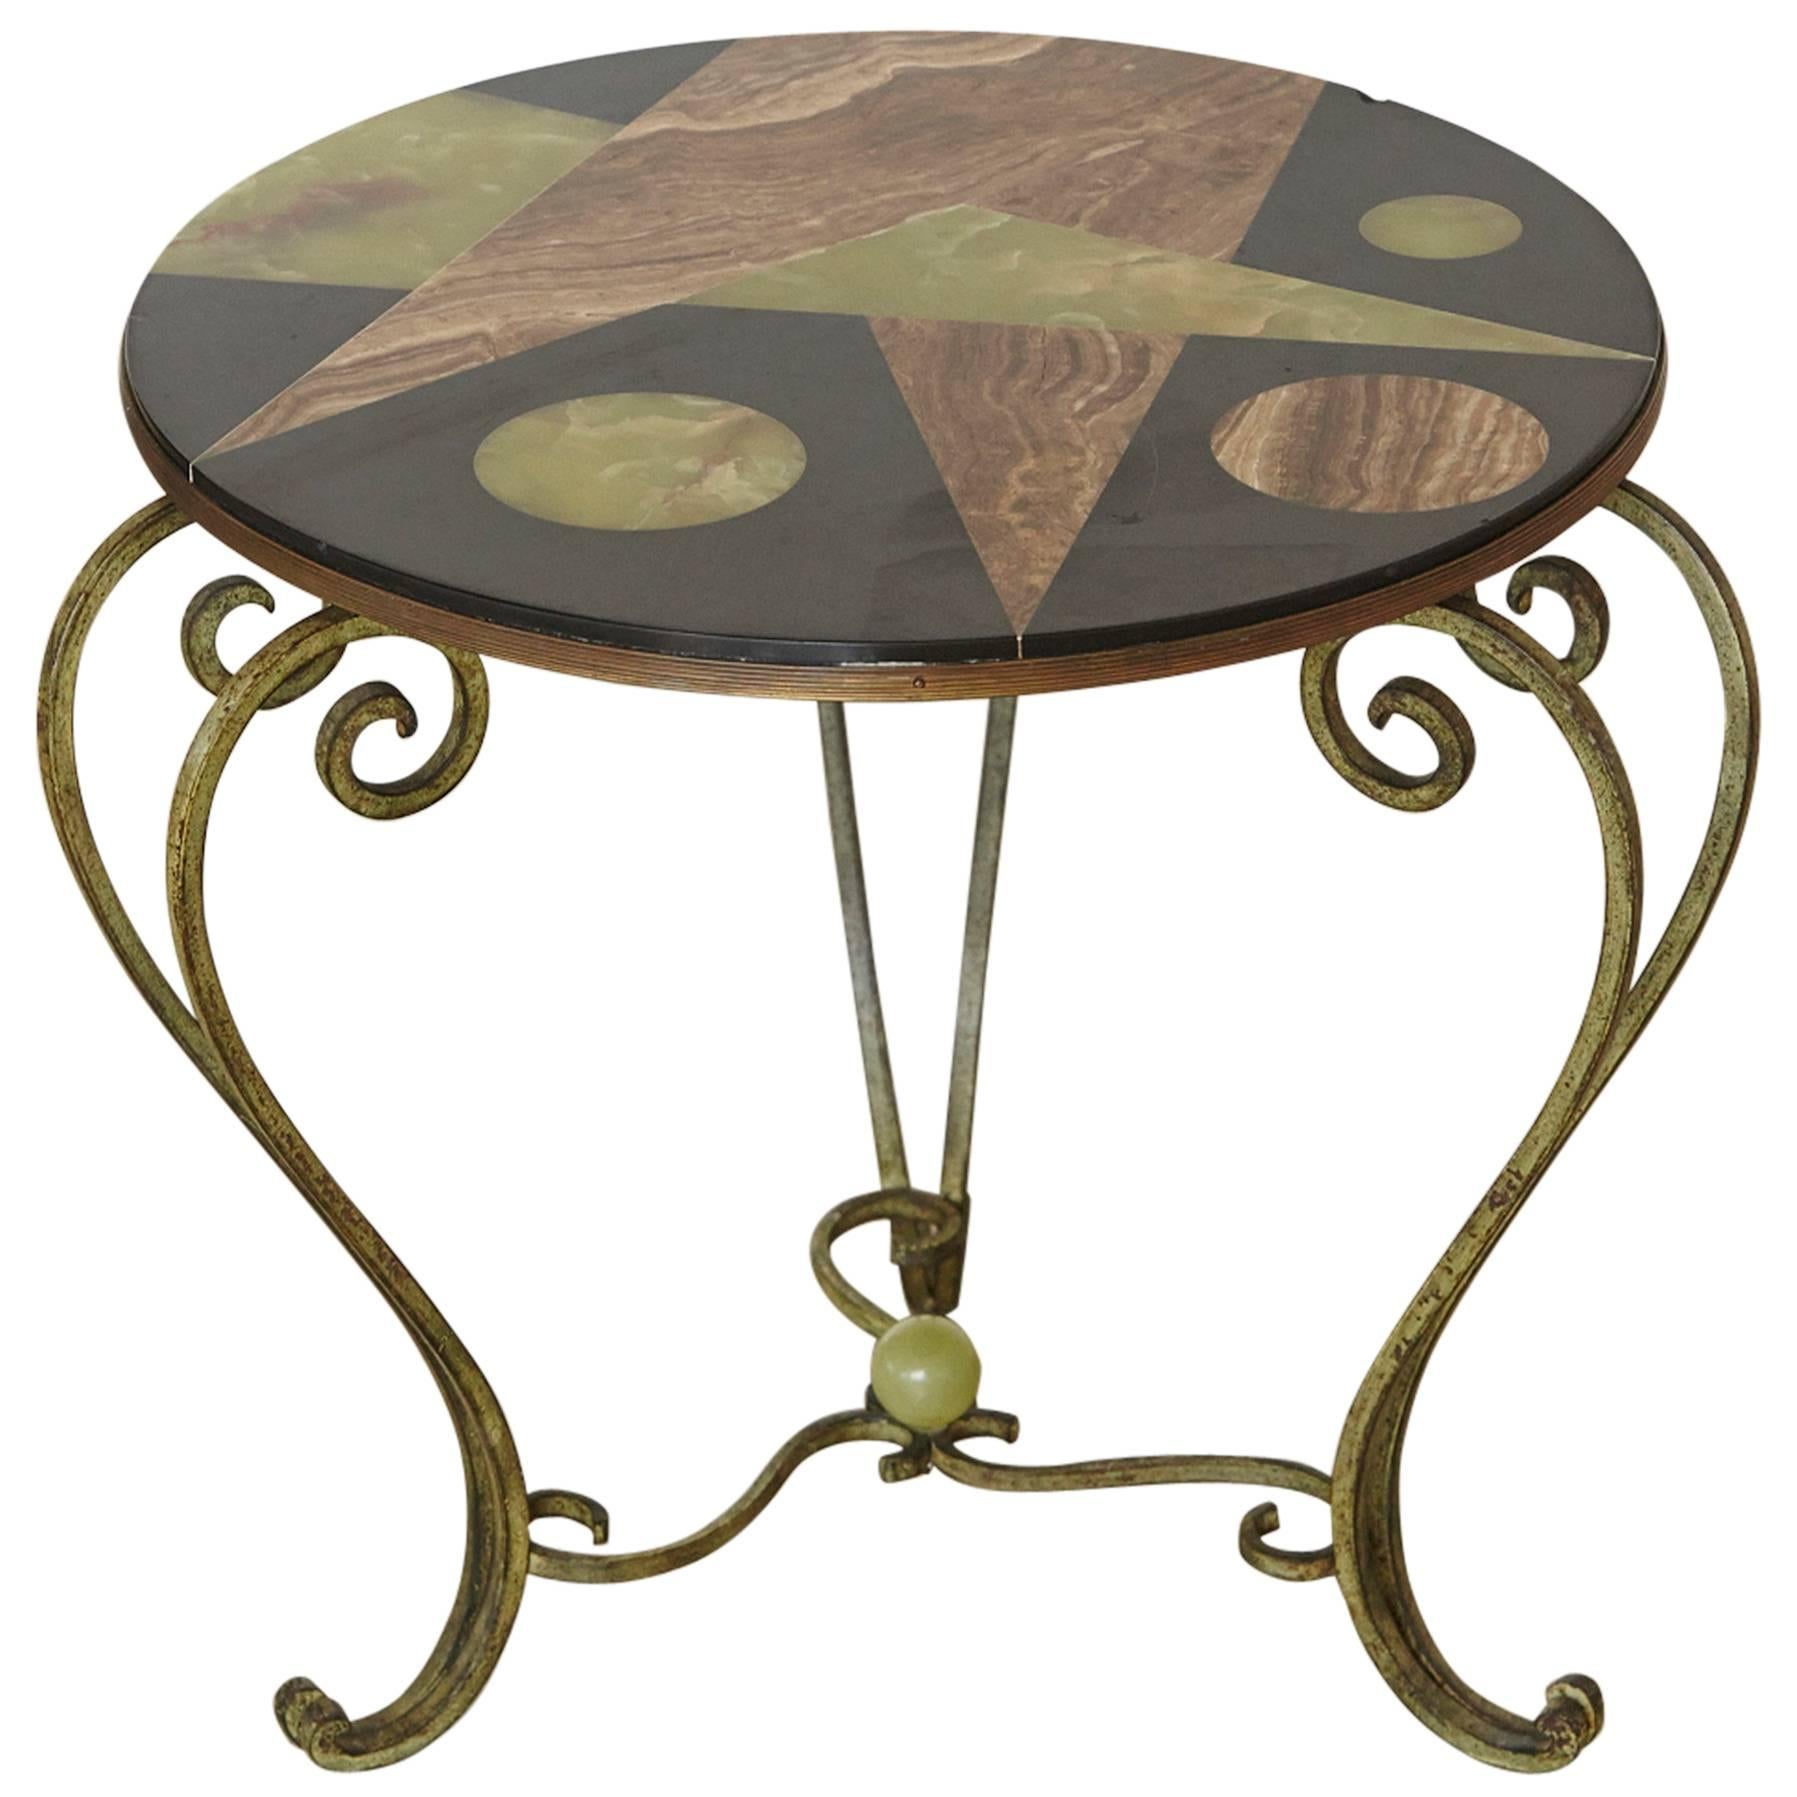 Wrought Iron Side Table with Black Marble Top and Geometric Inlays, circa 1940s